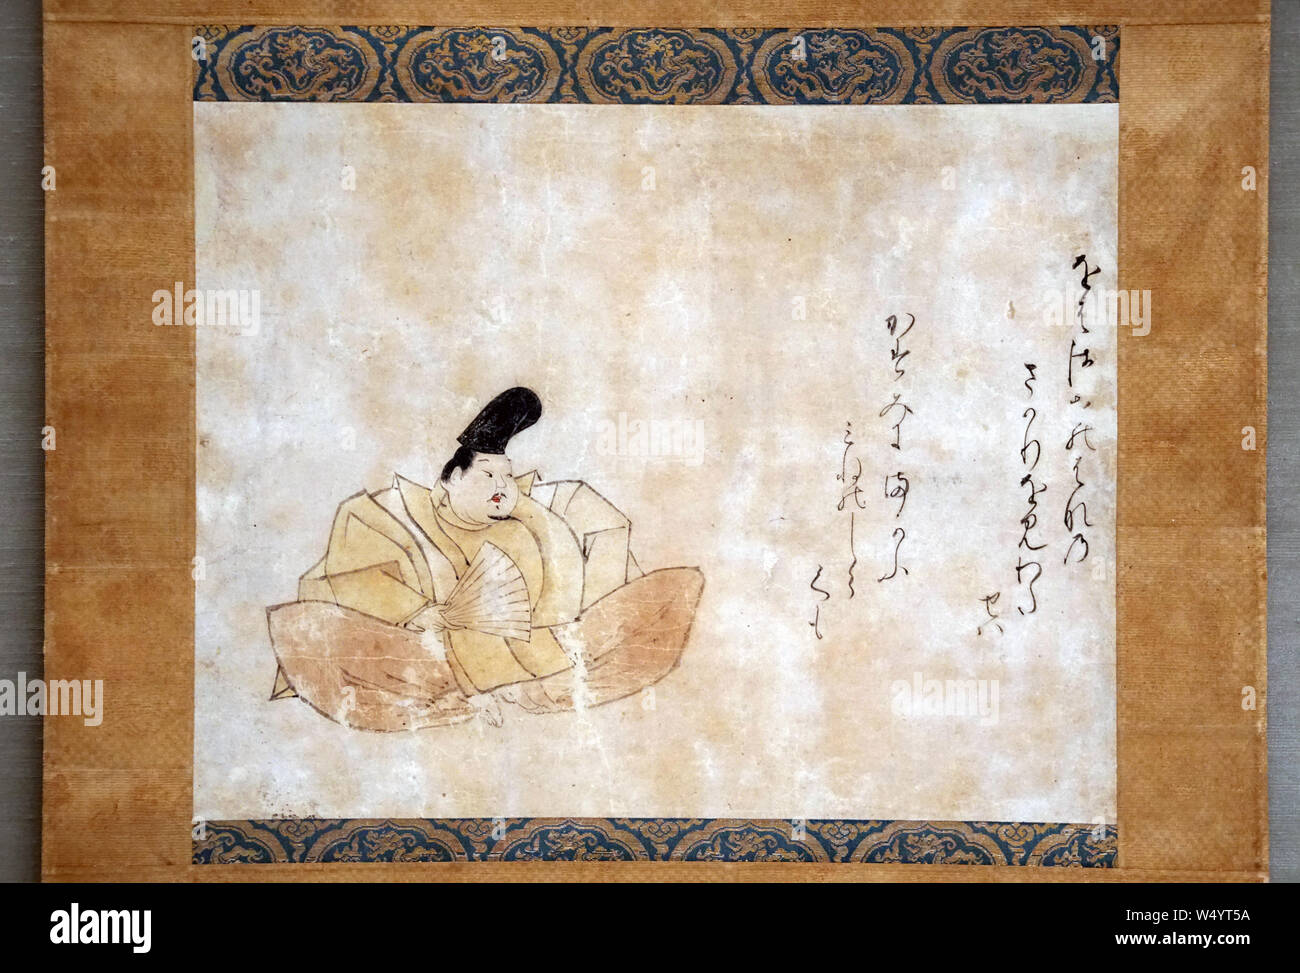 Poetry Contest between Poets of Different Periods: Minamoto no Shigeie, color on paper, Kamakura period, 13th century Stock Photo